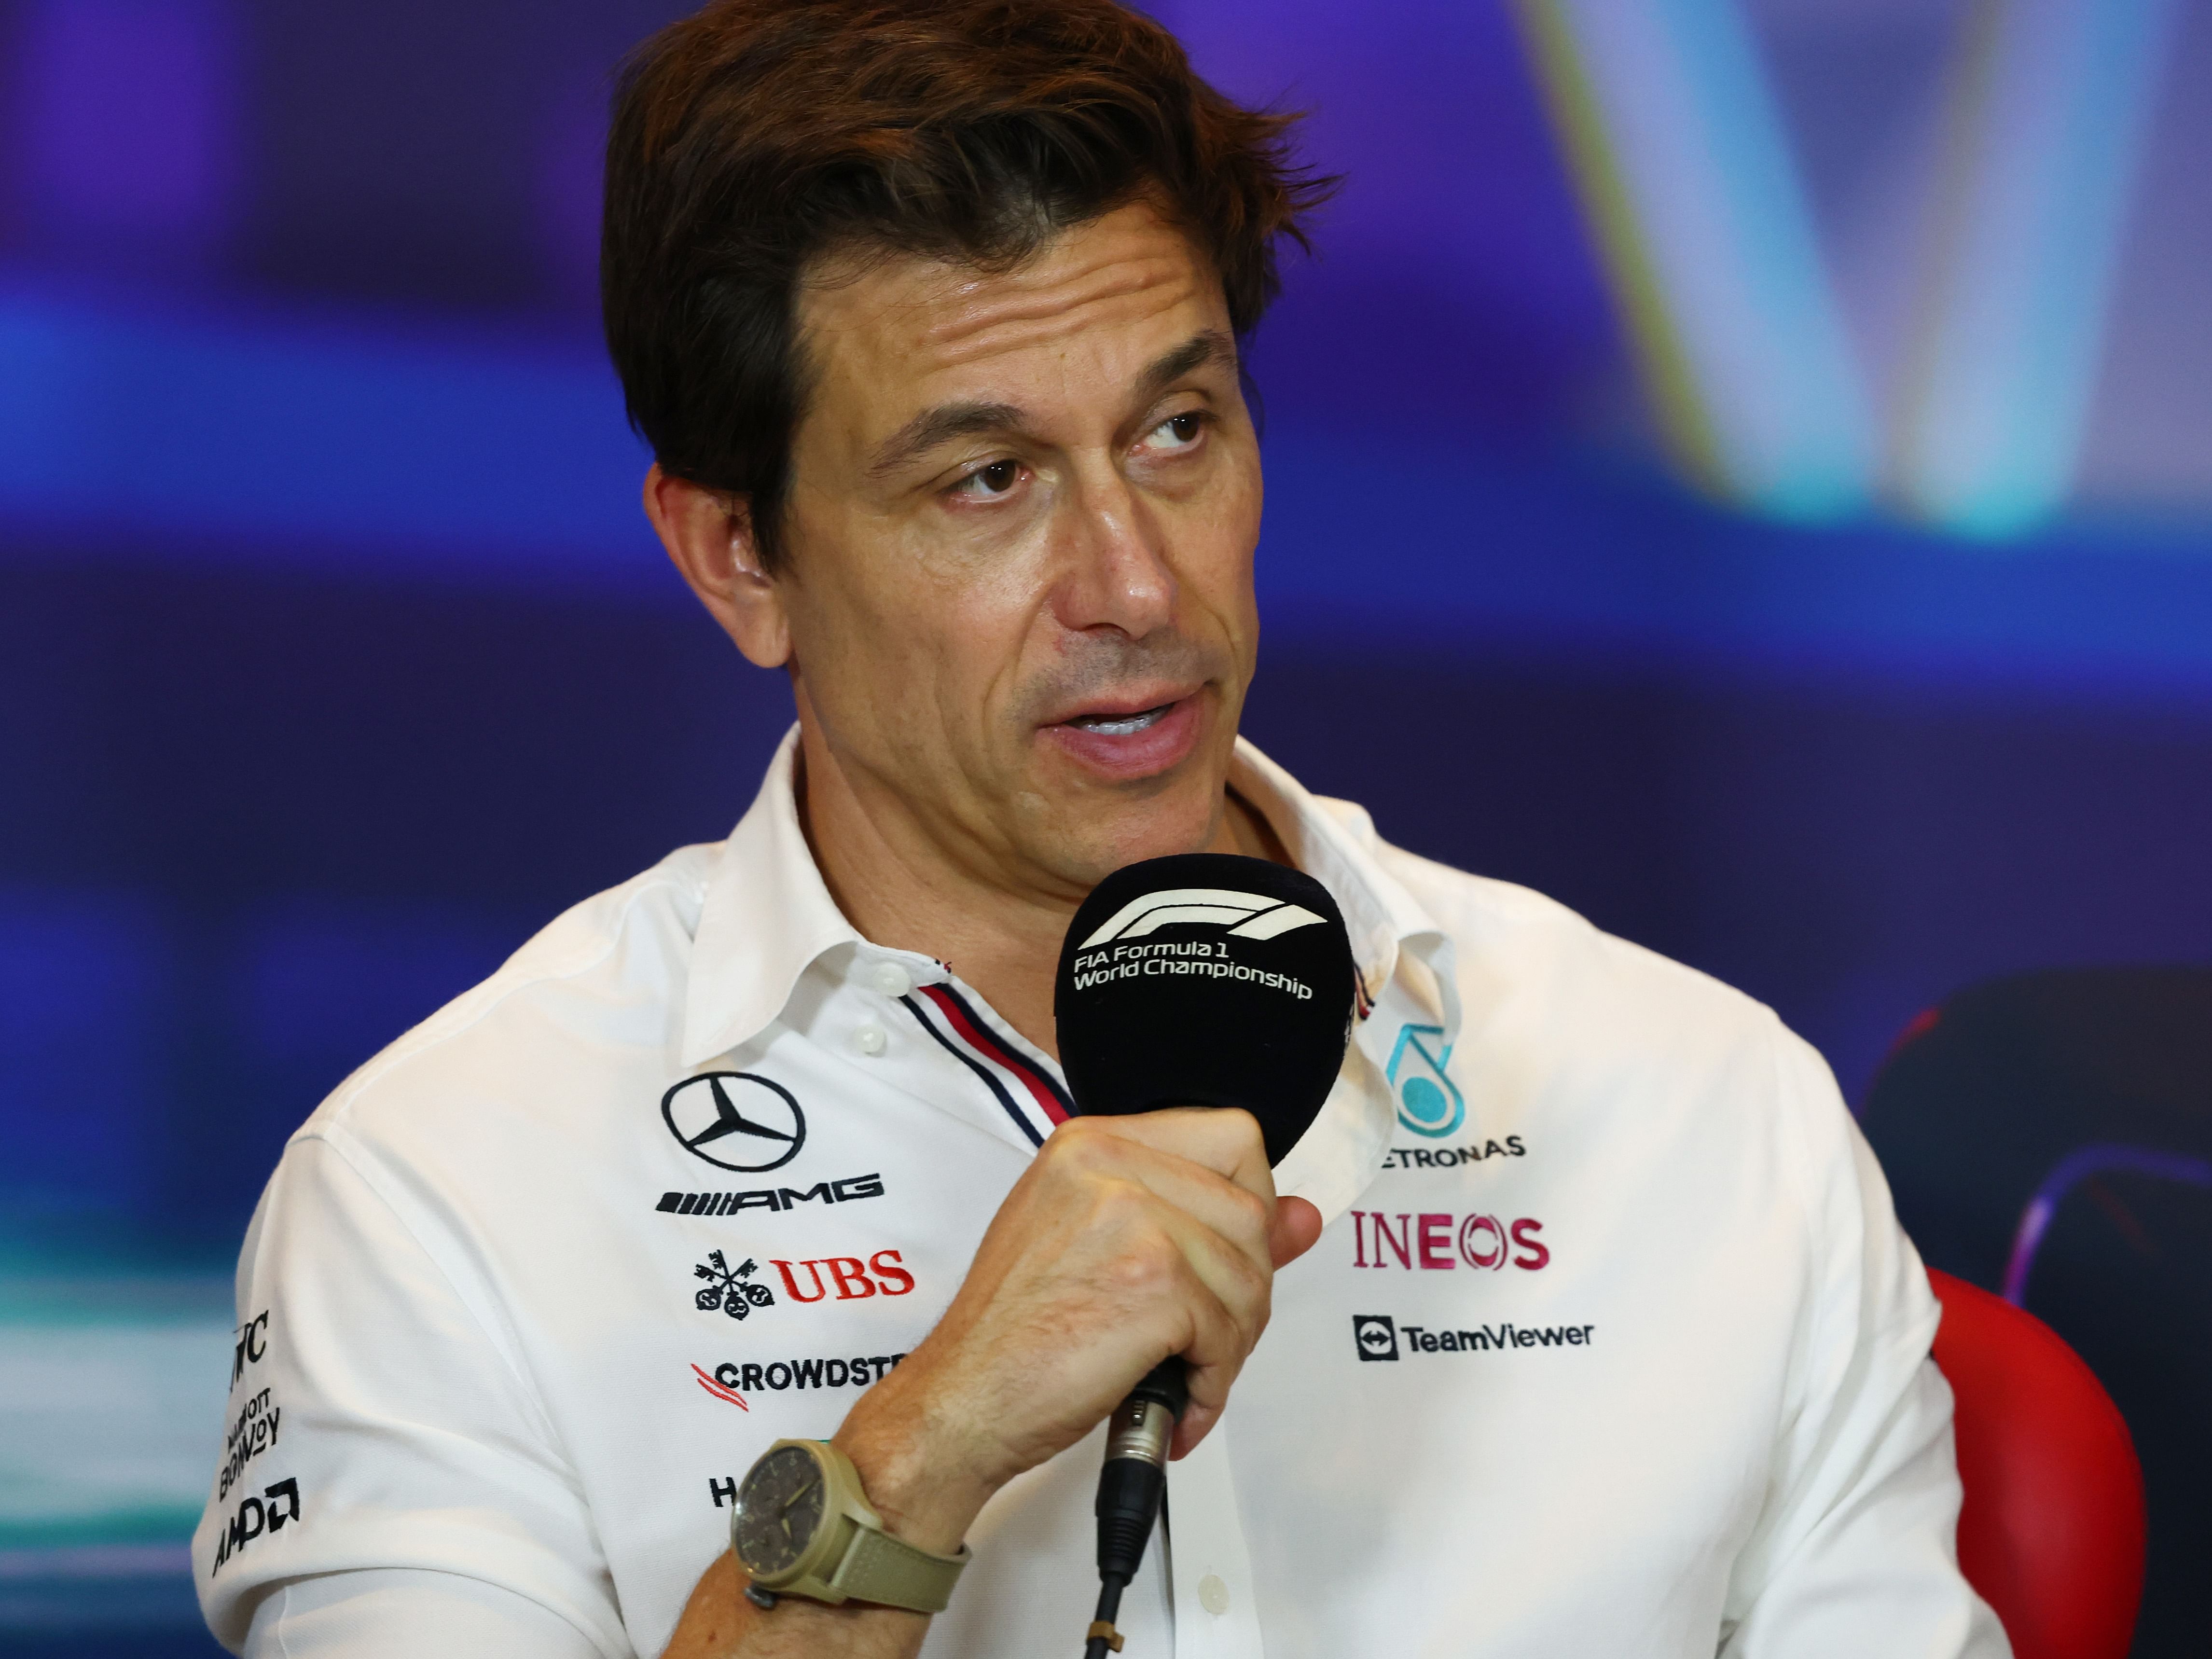 Mercedes GP Executive Director Toto Wolff talks in a press conference during final practice ahead of the F1 Grand Prix of Abu Dhabi at Yas Marina Circuit on November 19, 2022 in Abu Dhabi, United Arab Emirates. (Photo by Bryn Lennon/Getty Images)